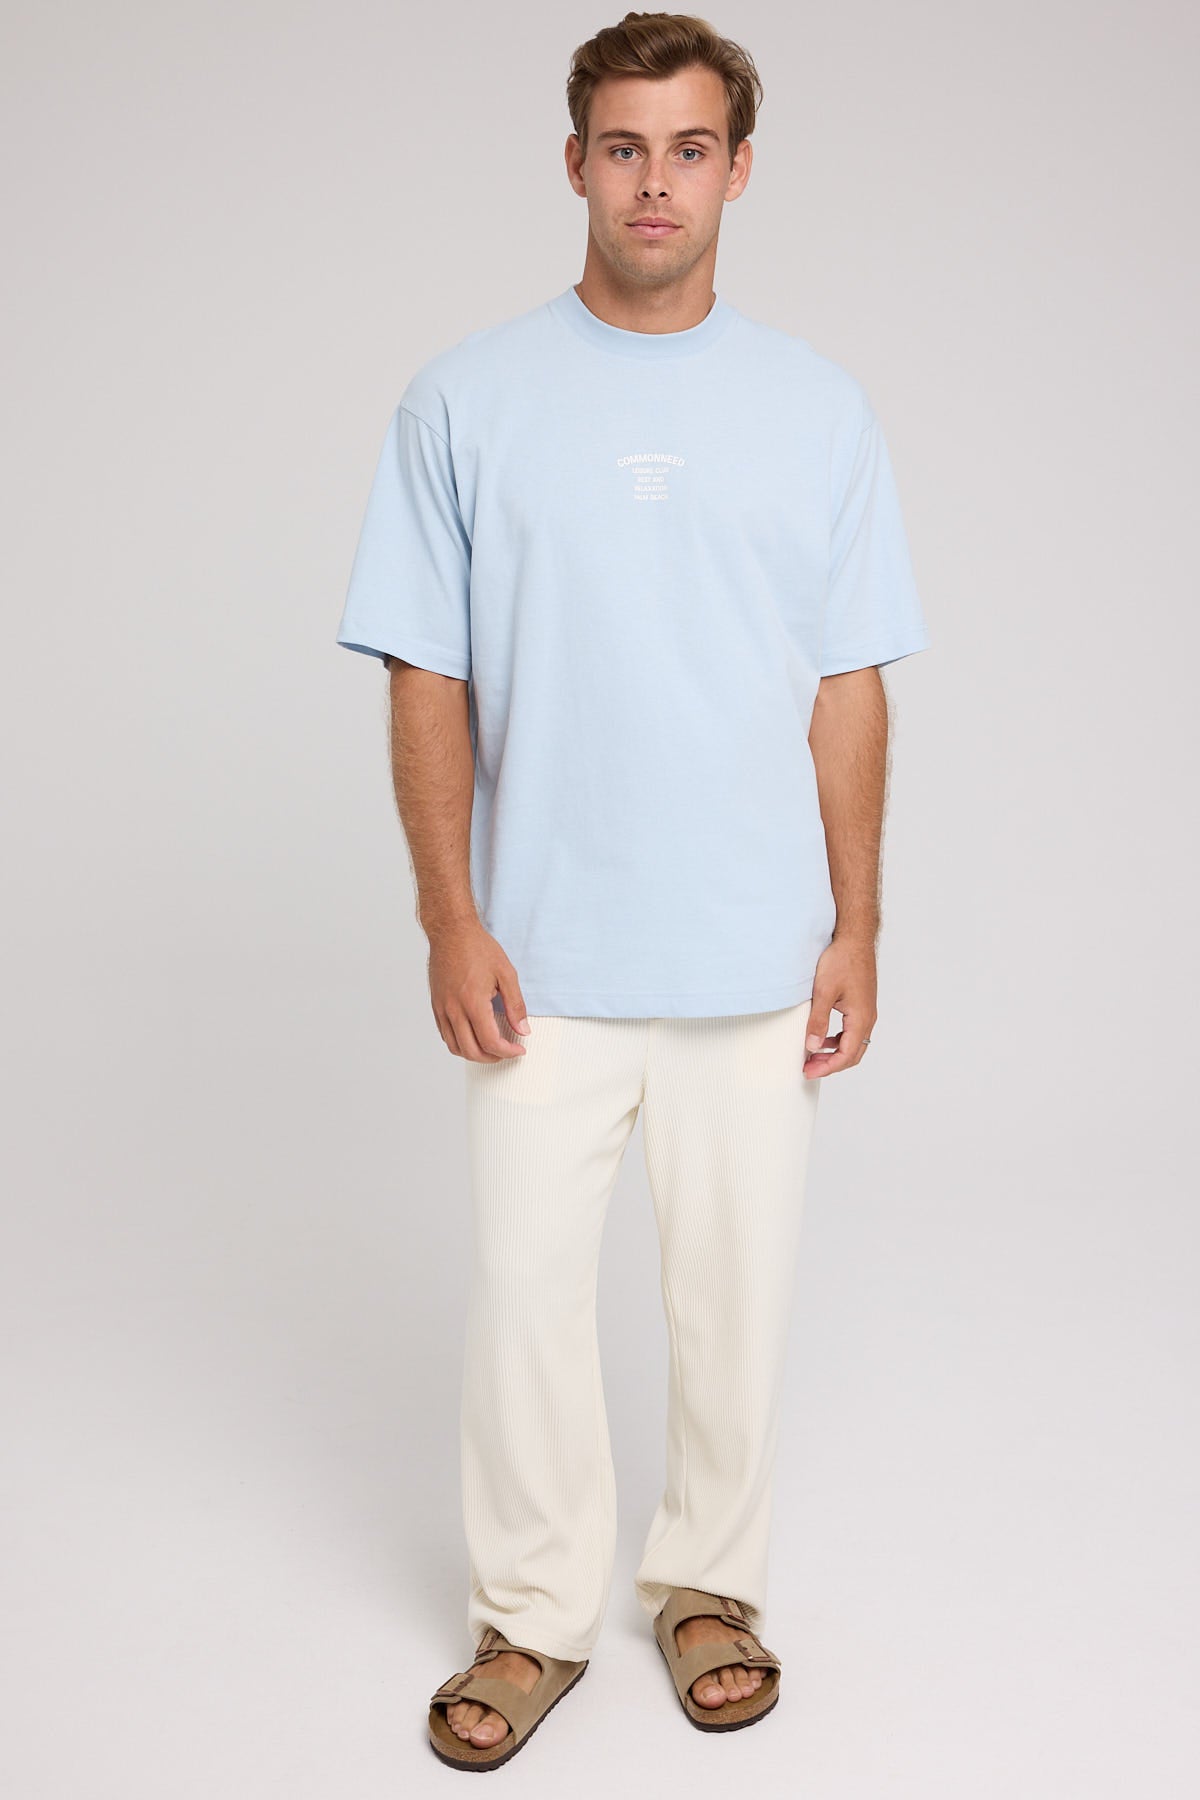 Common Need Relaxation Boxy Tee Blue